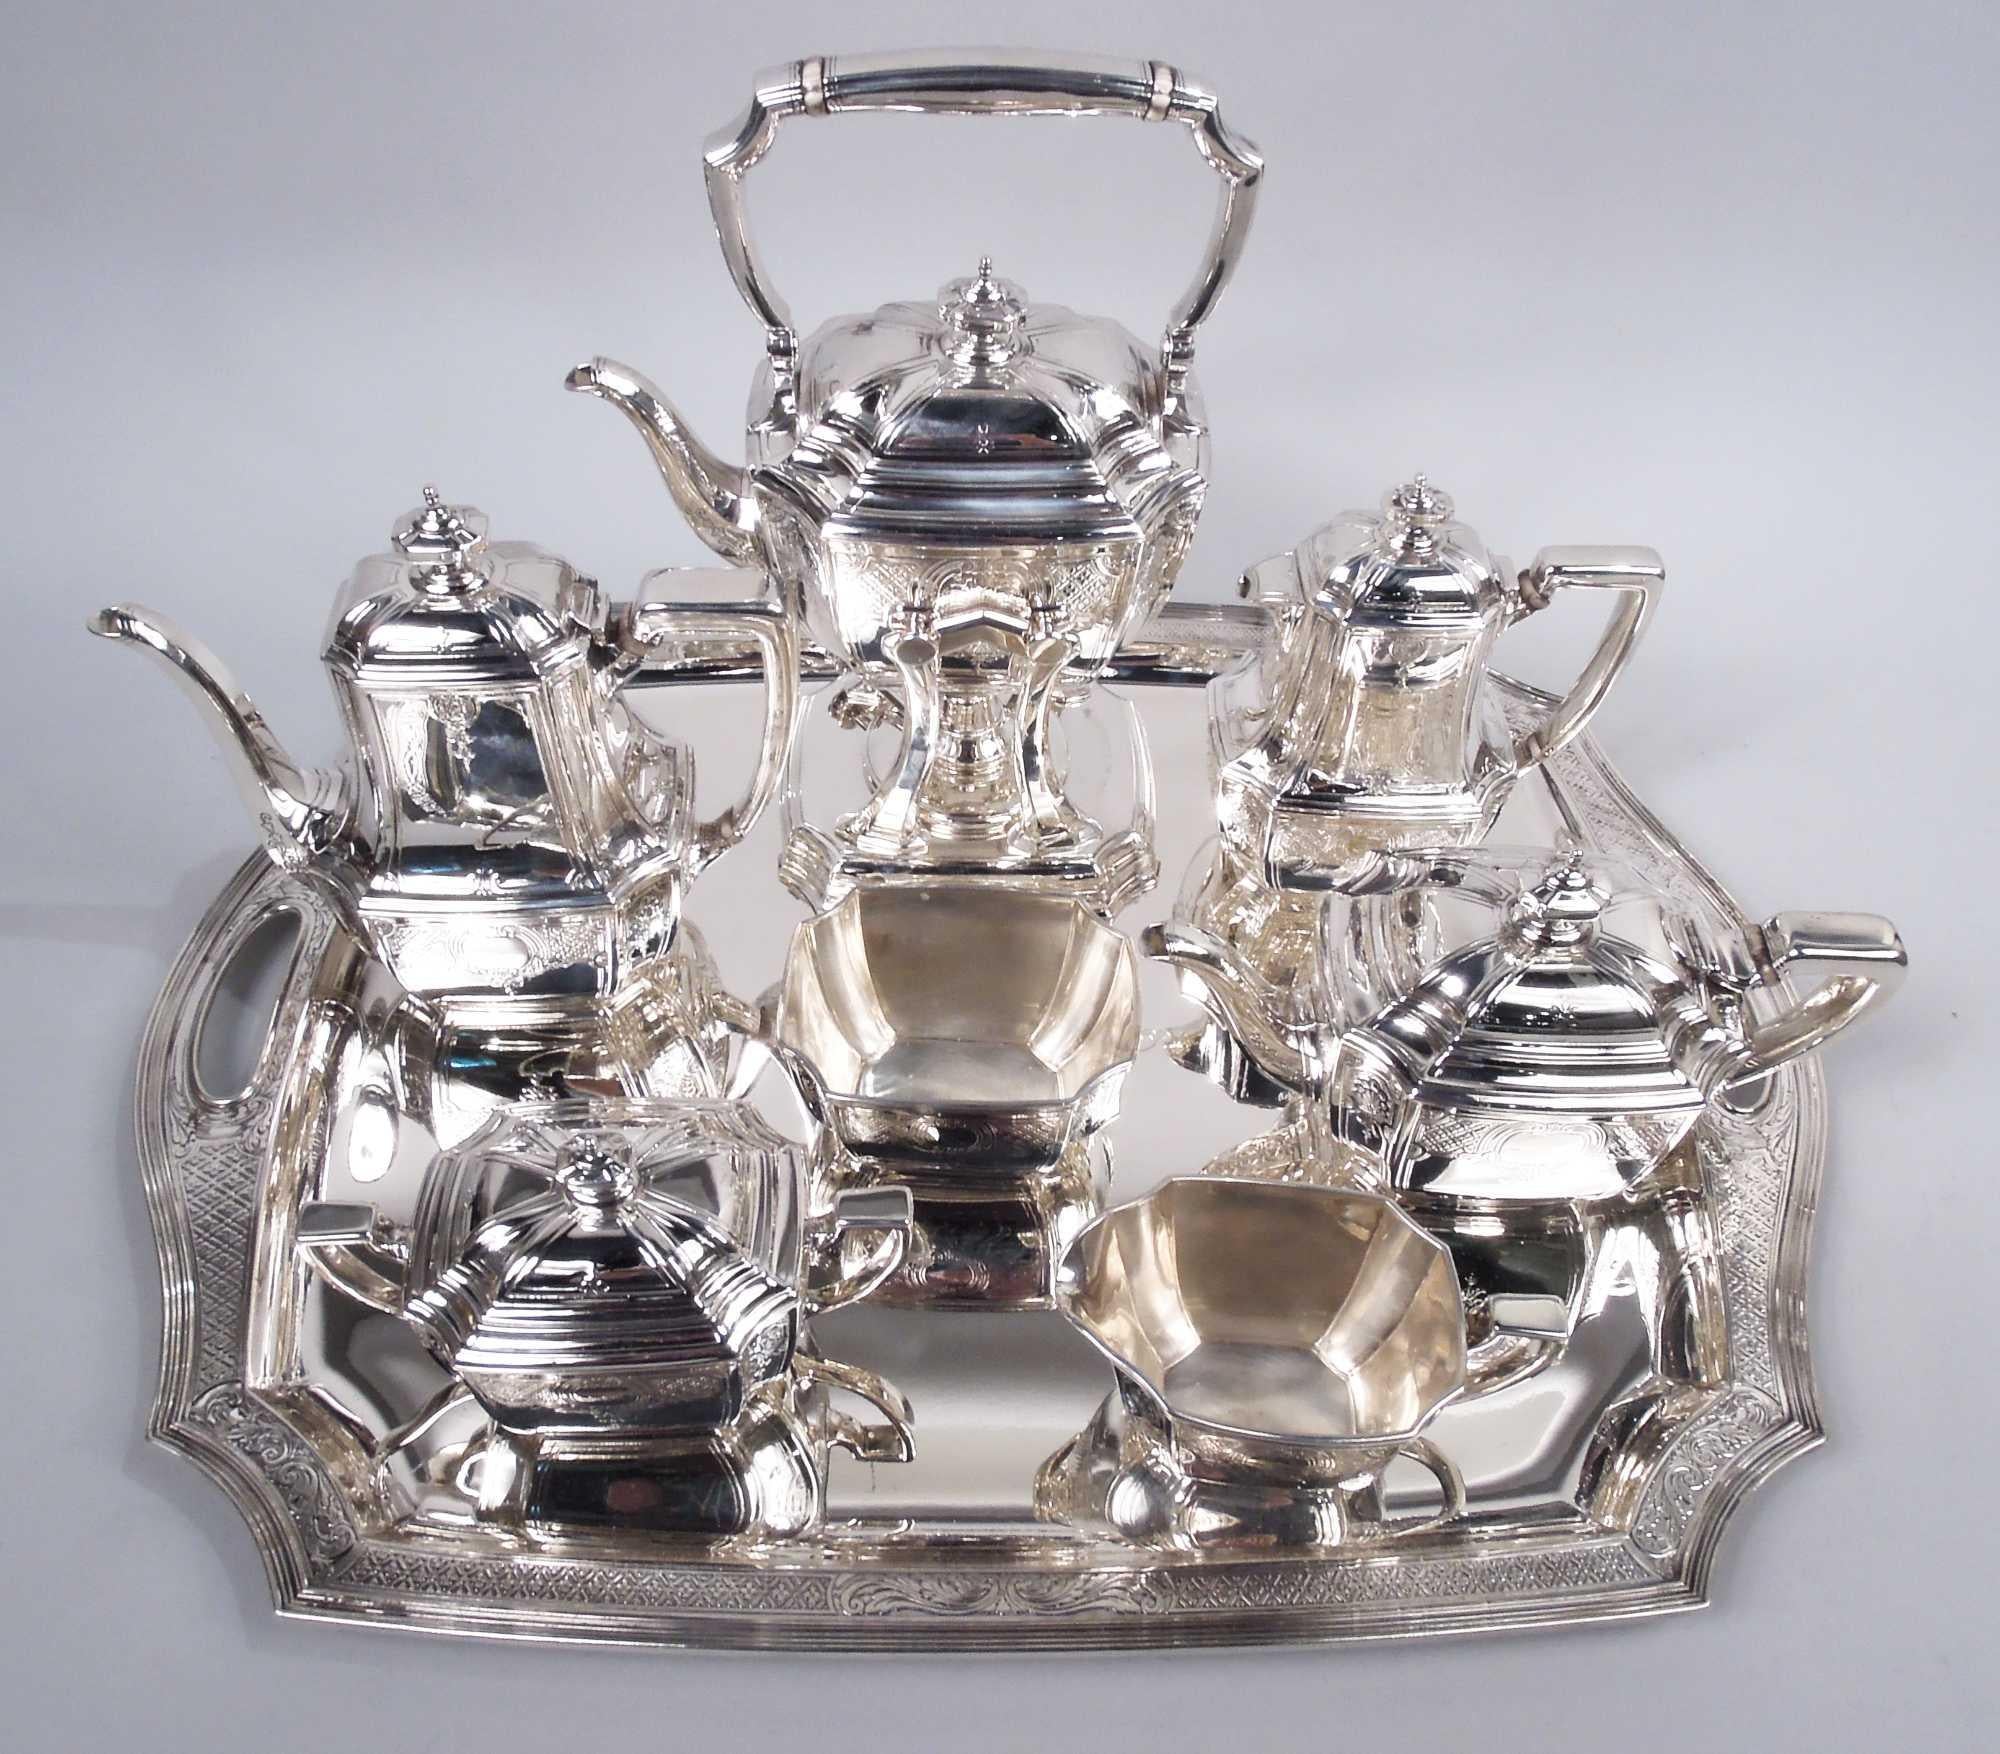 Engraved Hampton sterling silver coffee and tea set. Made by Tiffany & Co. in New York, ca 1920. This set comprises 8 pieces: Hot water kettle on stand, coffeepot, teapot, hot milk pot, creamer, sugar, and waste bowl on tray.

Rectilinear with